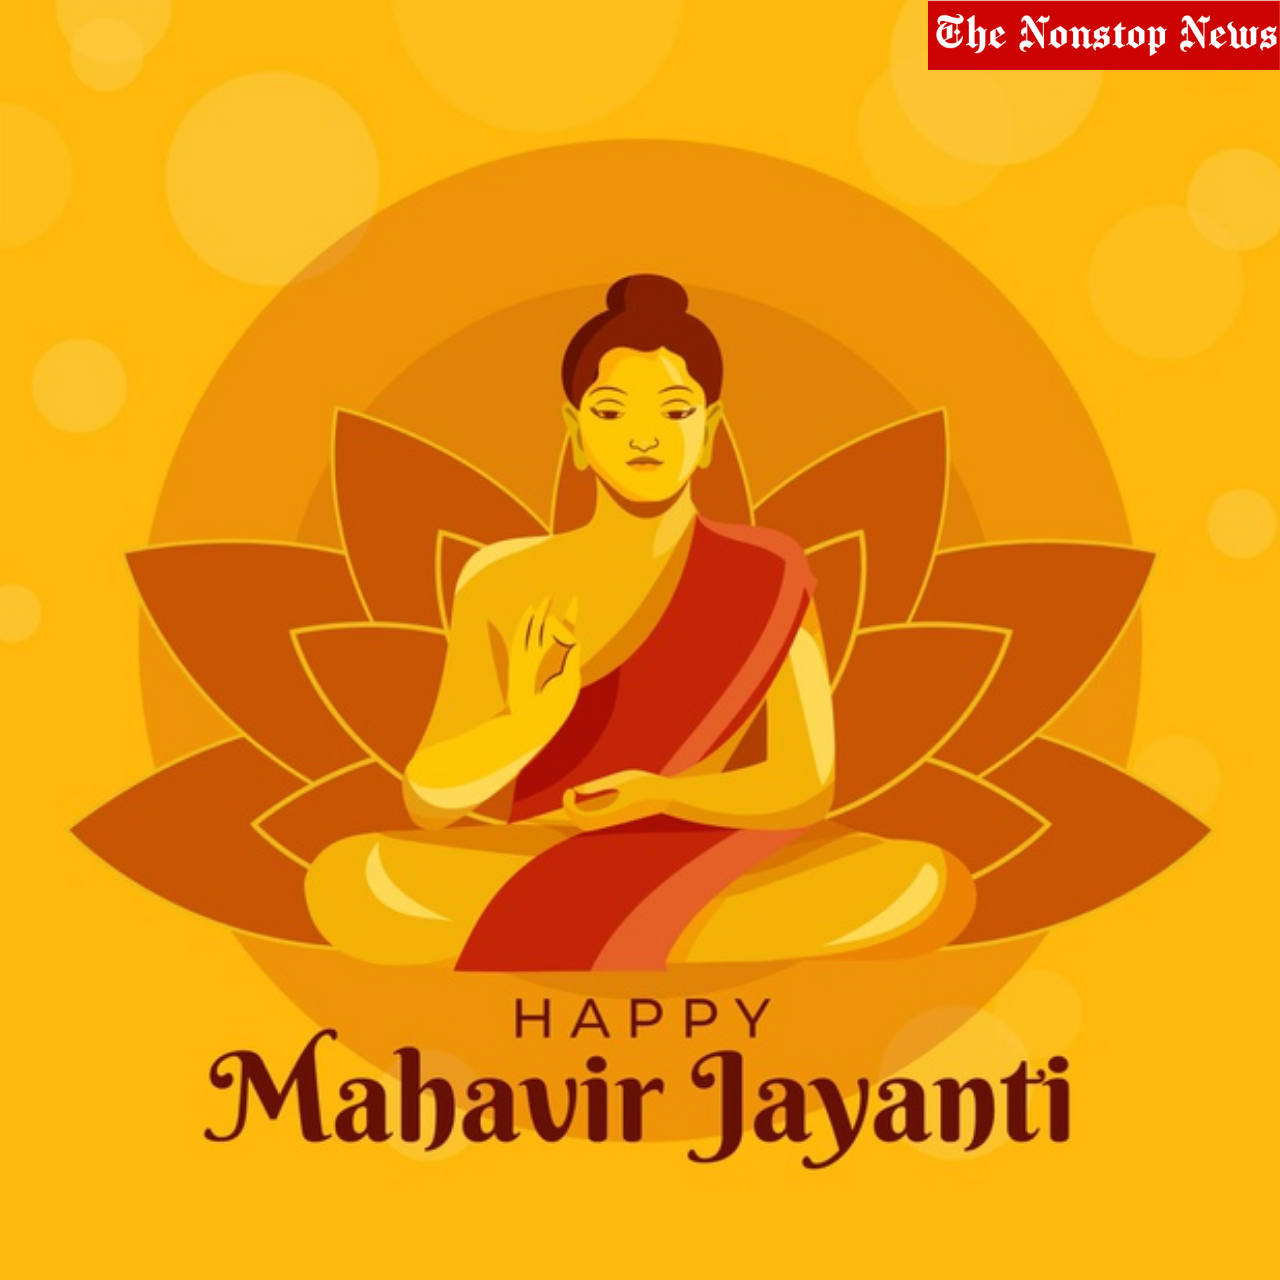 Happy Mahavir Jayanti 2021 Wishes, Messages, Greetings, WhatsApp Status, Quotes, and Images to Share